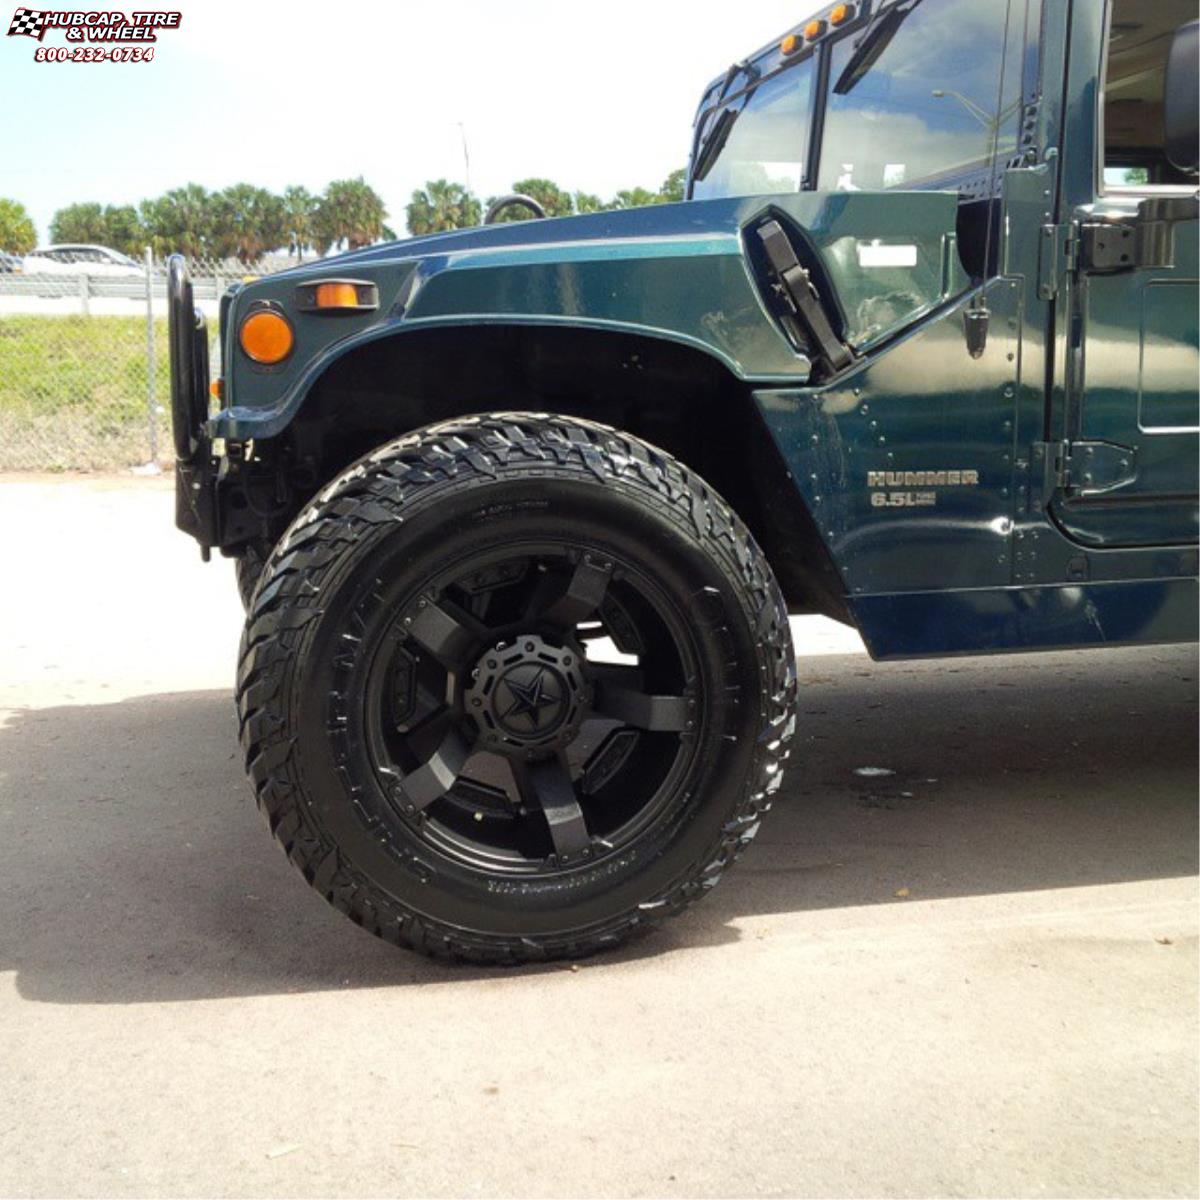 vehicle gallery/hummer h1 xd series xd811 rockstar 2  Satin Black and Black Inserts wheels and rims